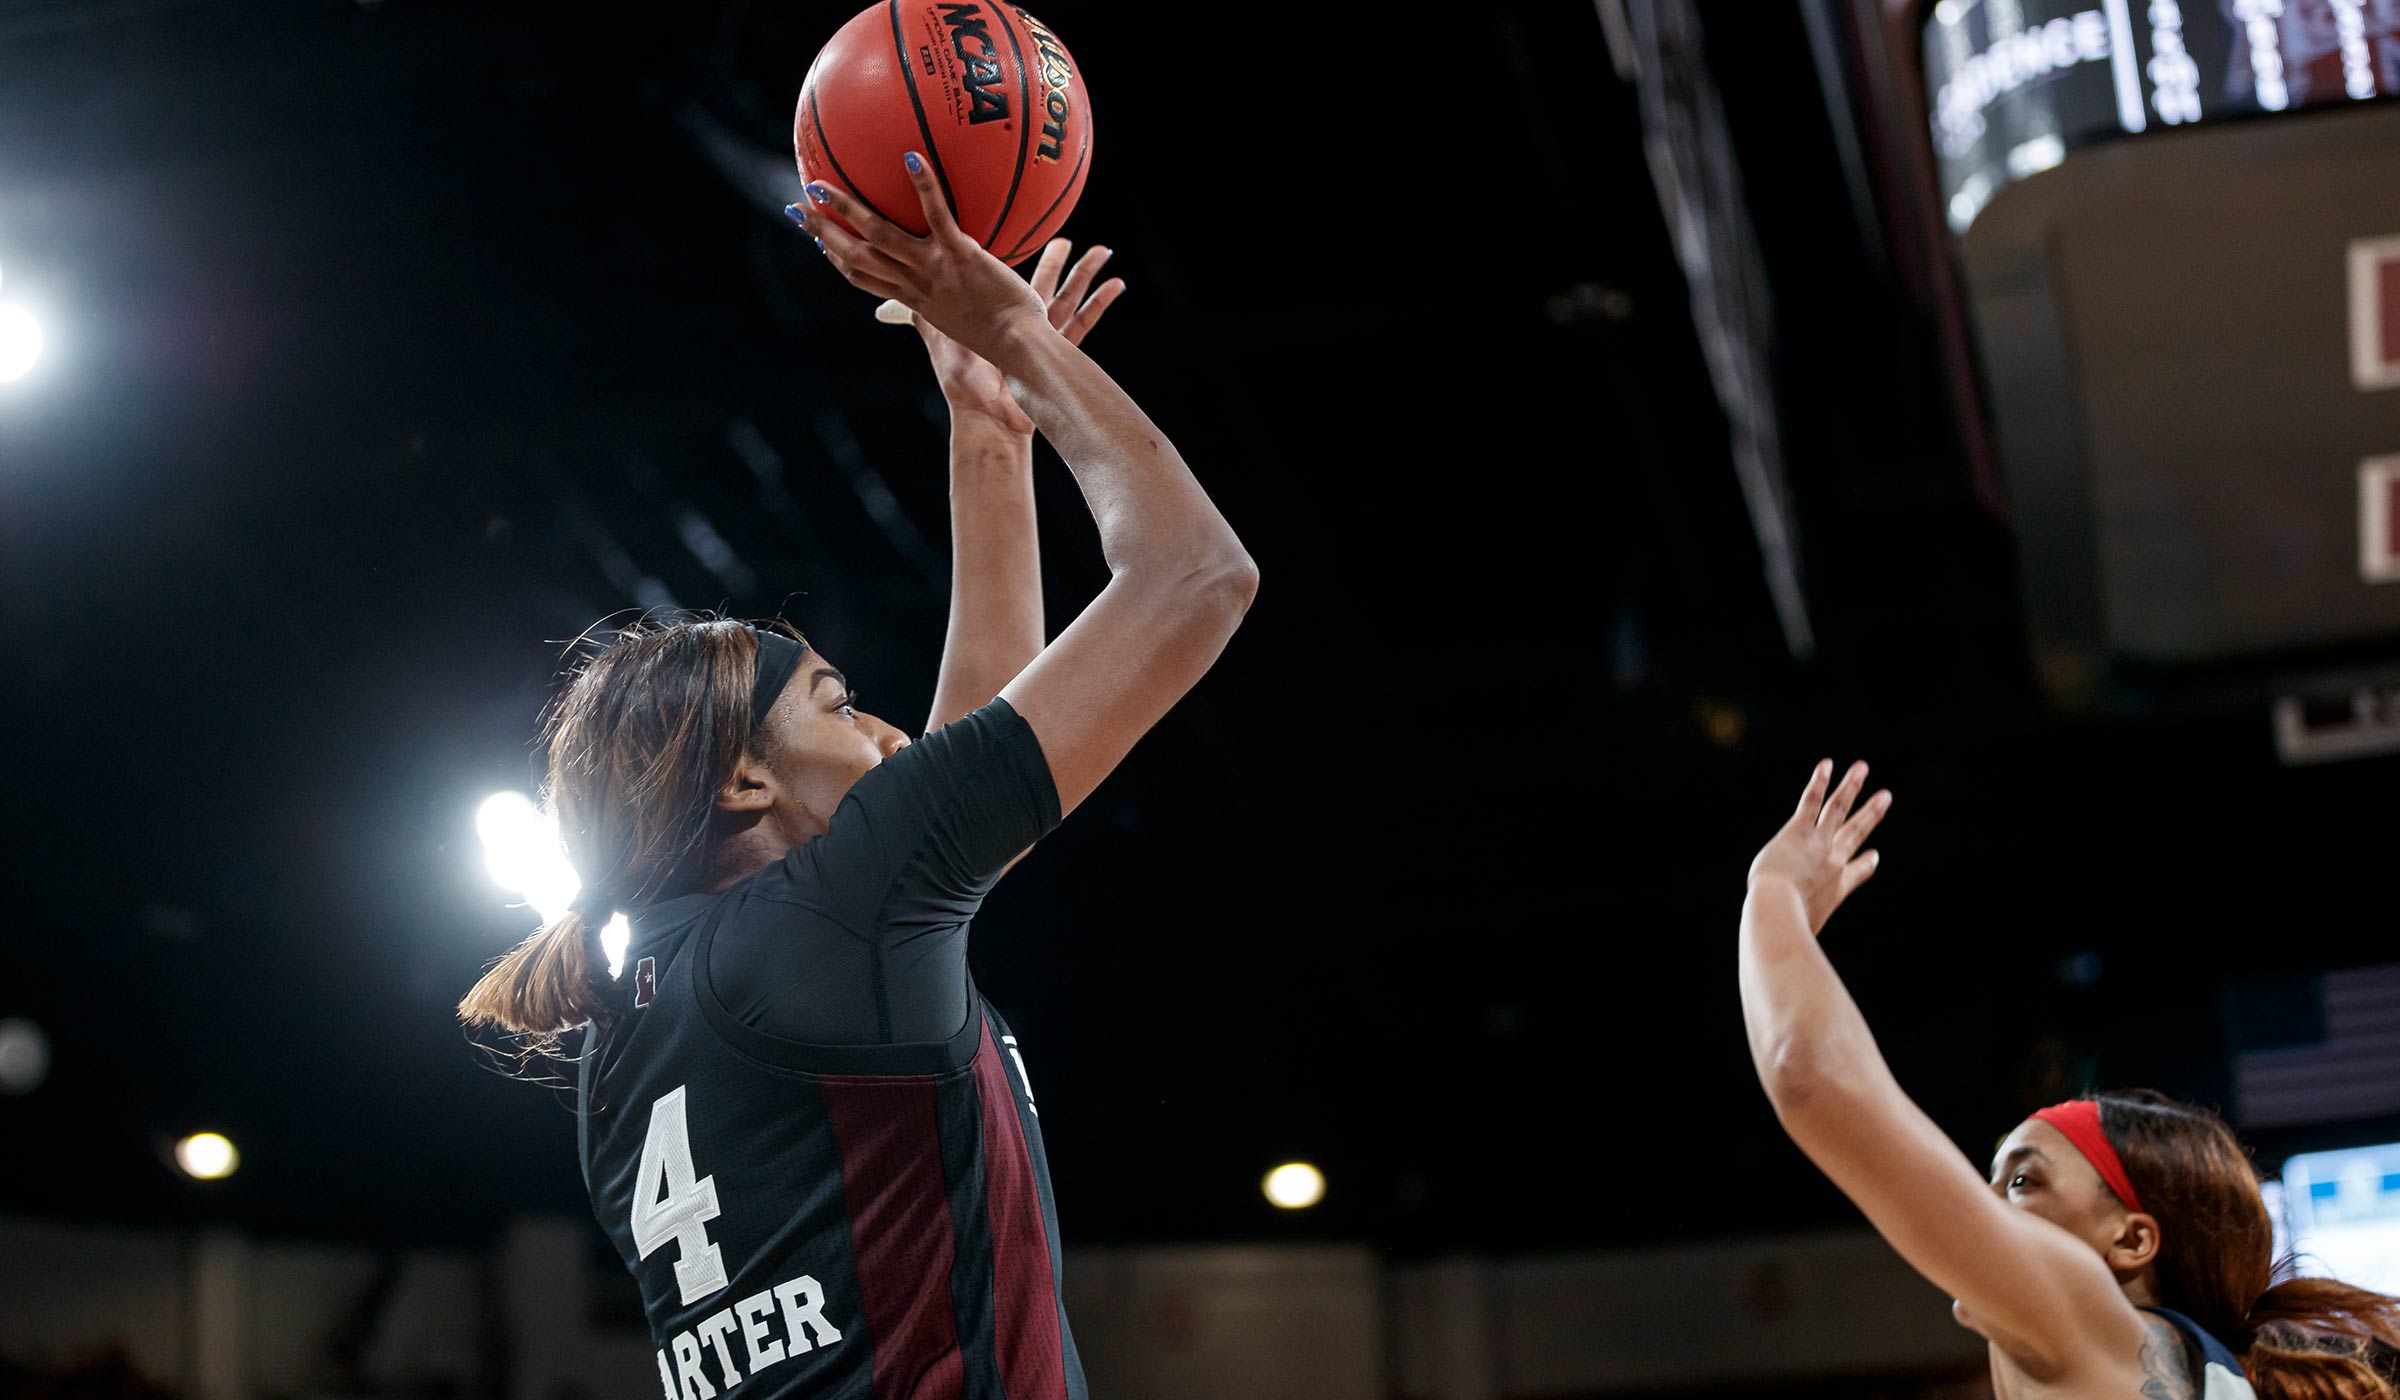 Women&#039;s basketball player in black uniform shooting the ball over opponents&#039; head.